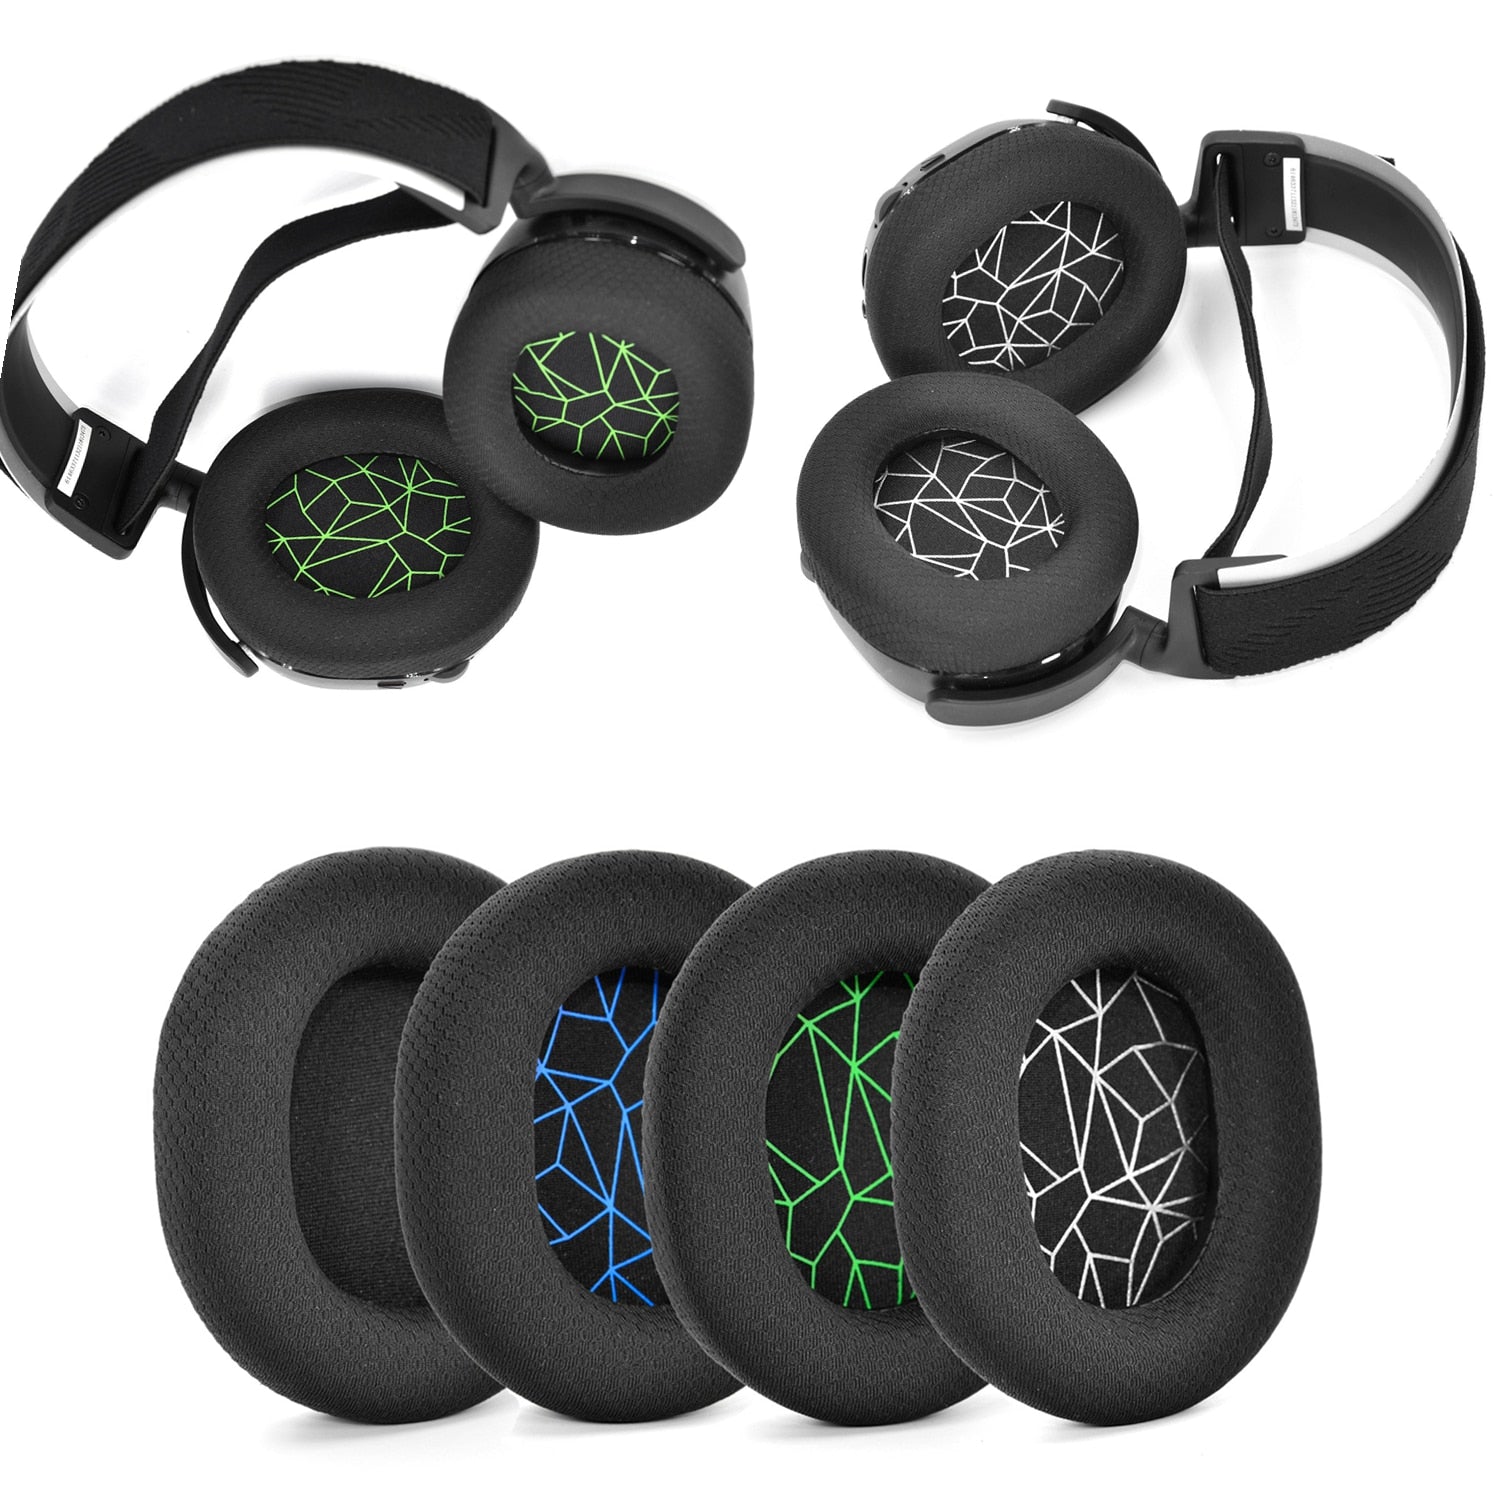 image of 4 steel series foam earpads with black, blue, green and white arctic design